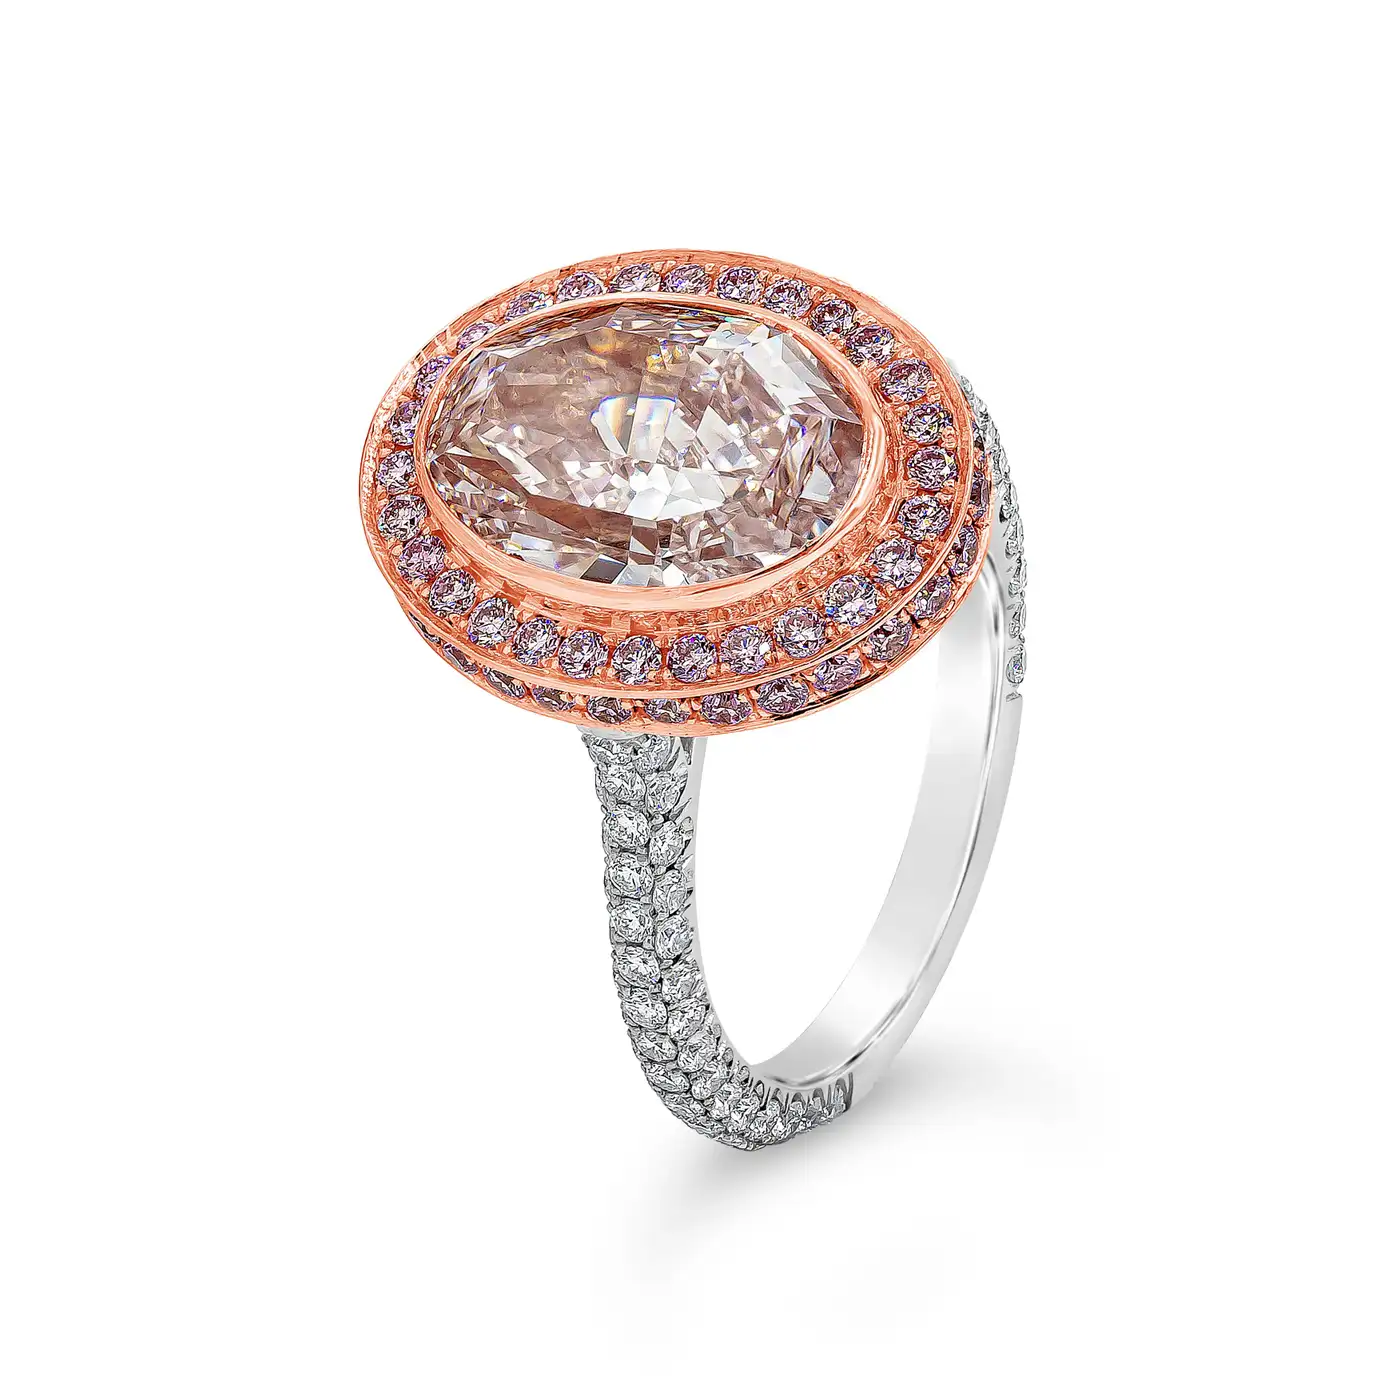 3.66-Oval-Cut-Fancy-Light-Pink-Diamond-Halo-Engagement-Ring-GIA-Certified-3.webp